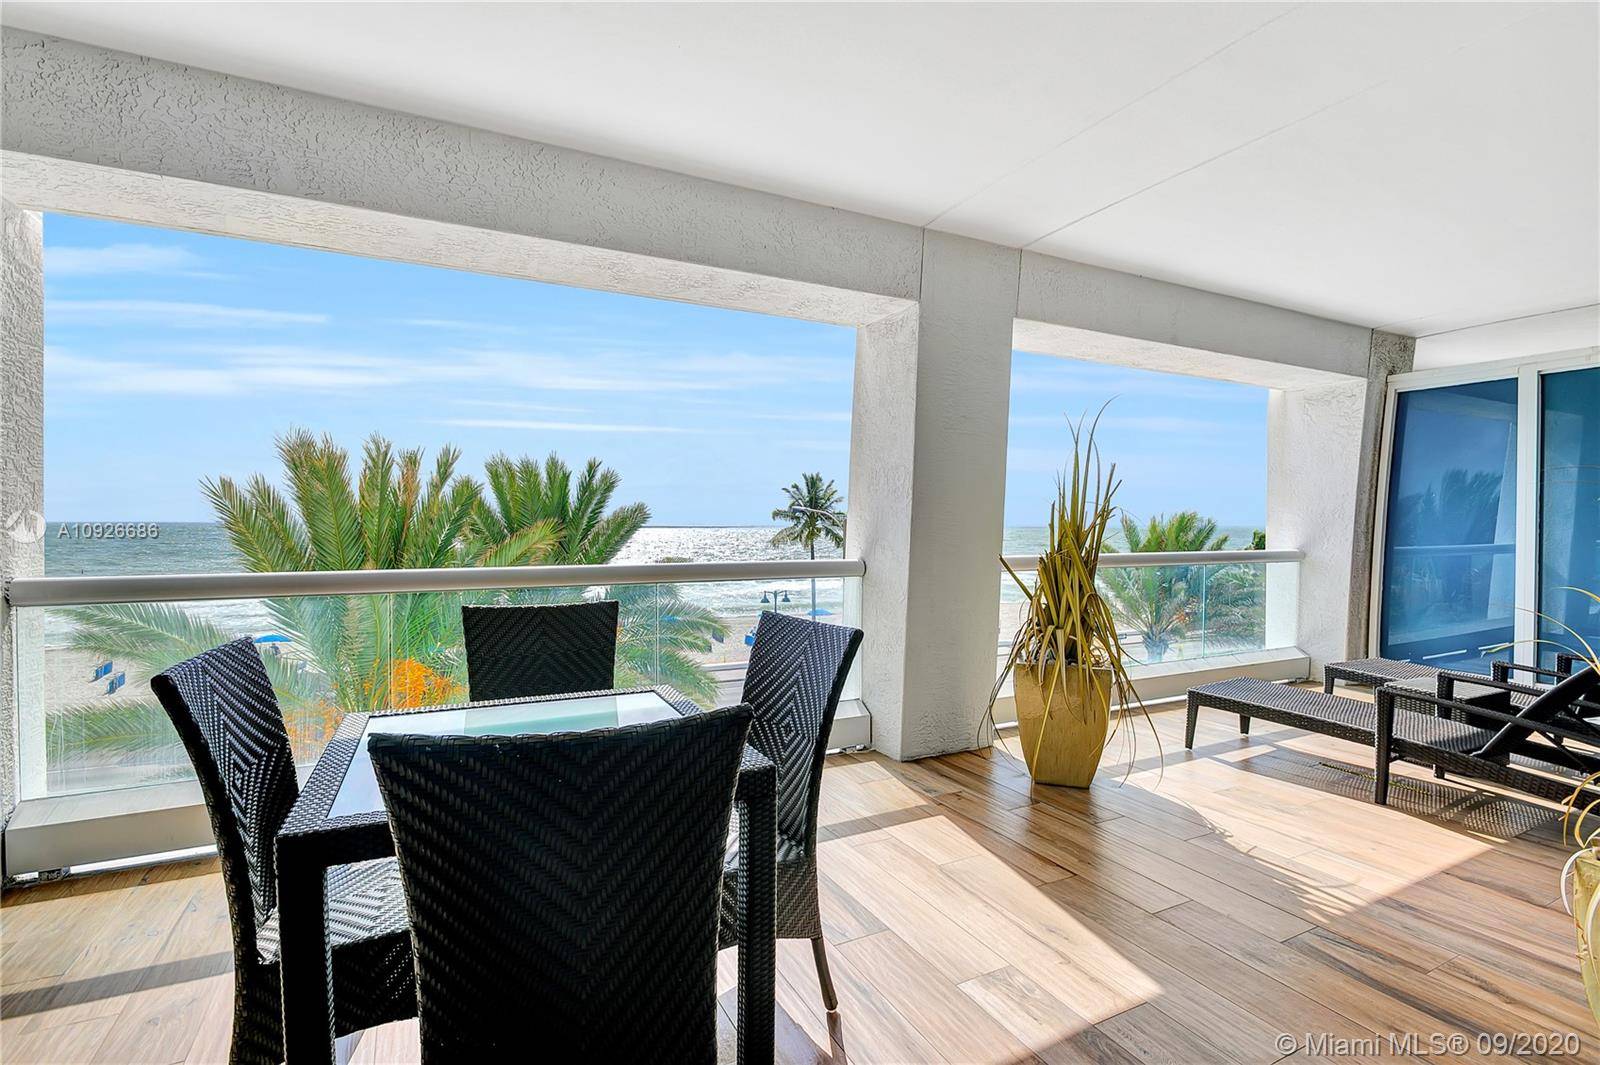 This direct ocean 1 bedroom is a completely furnished, finished and turn key residence at The Ocean Resort Residences Conrad Fort Lauderdale Beach !